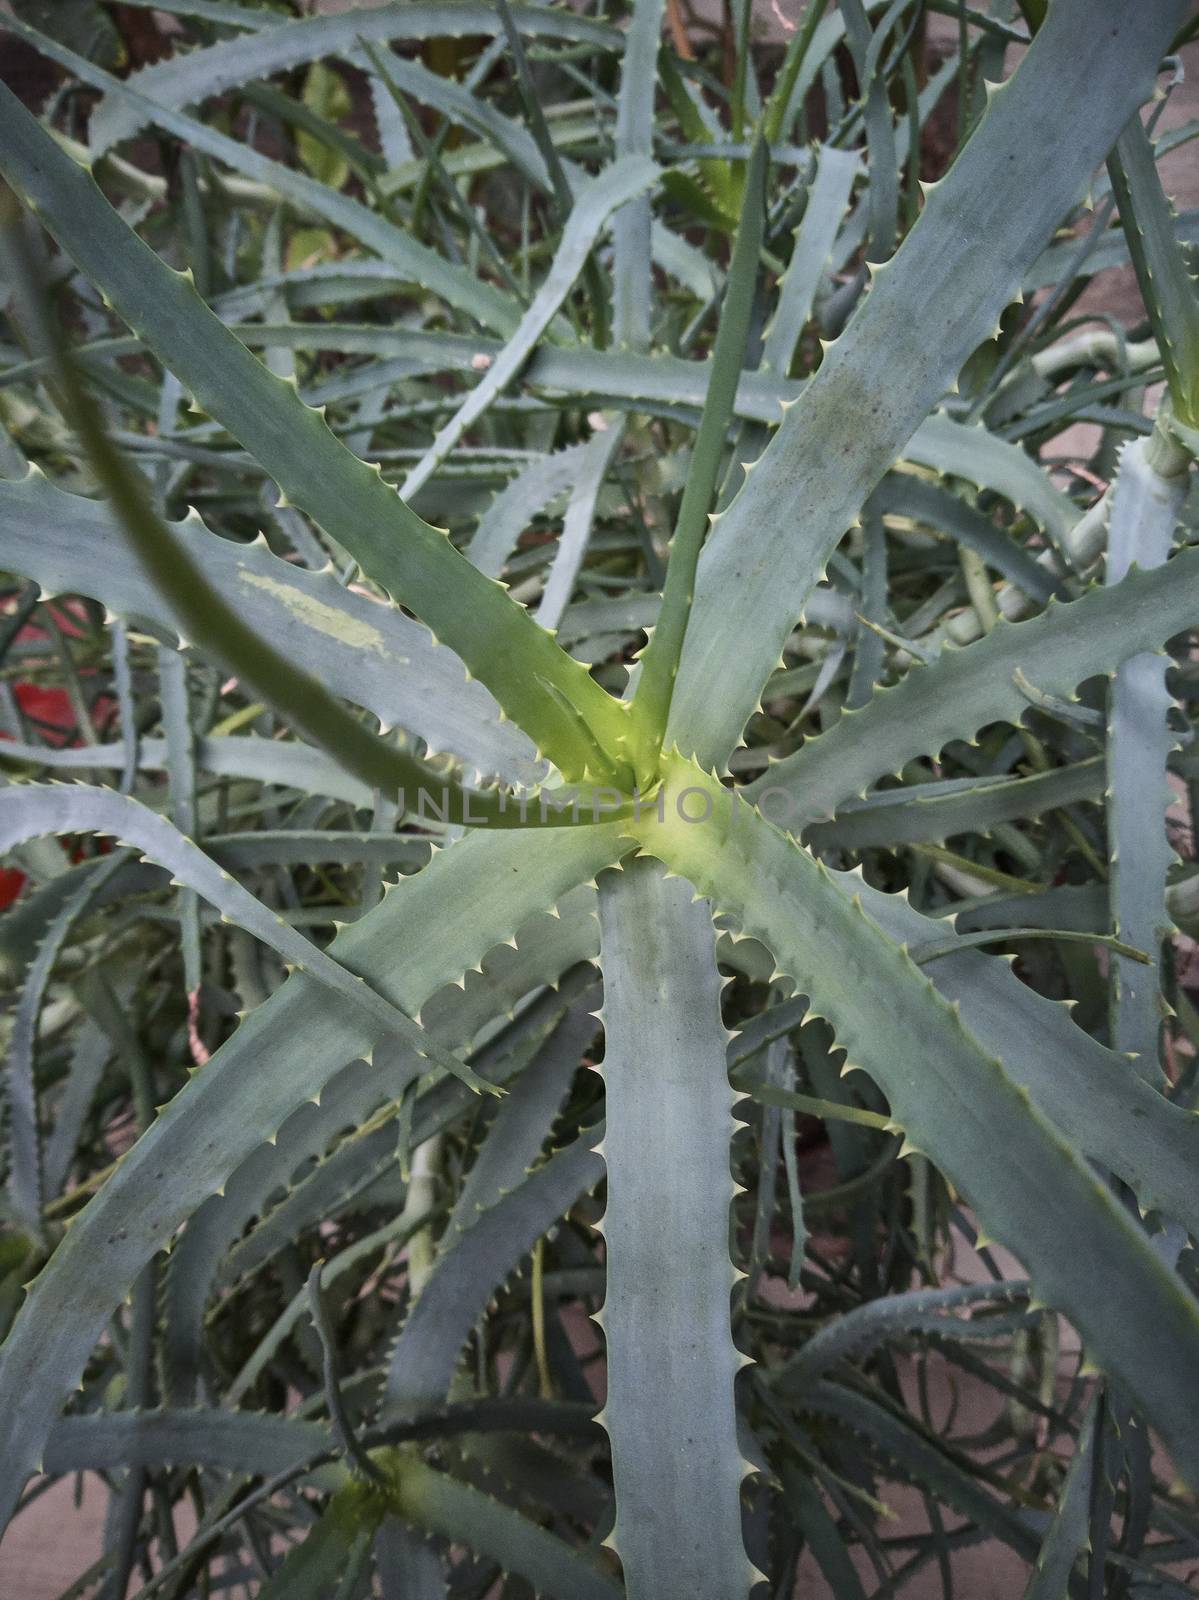 The aloe plant grown indoors by pippocarlot